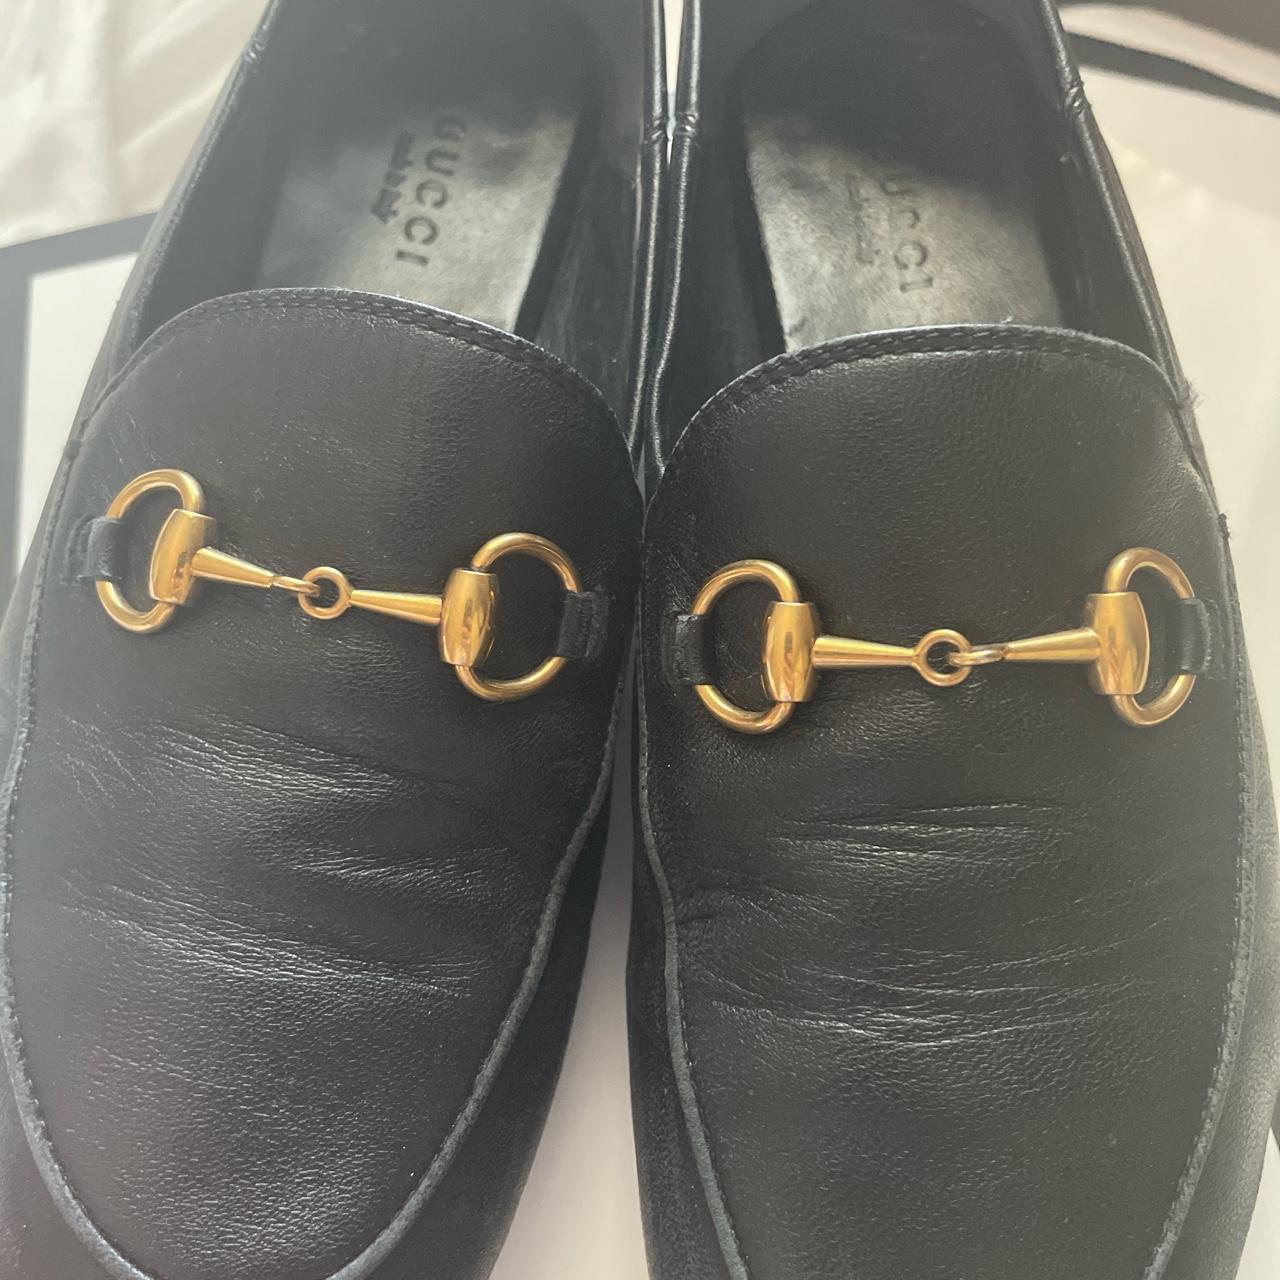 Gucci Women's Black and Gold Loafers